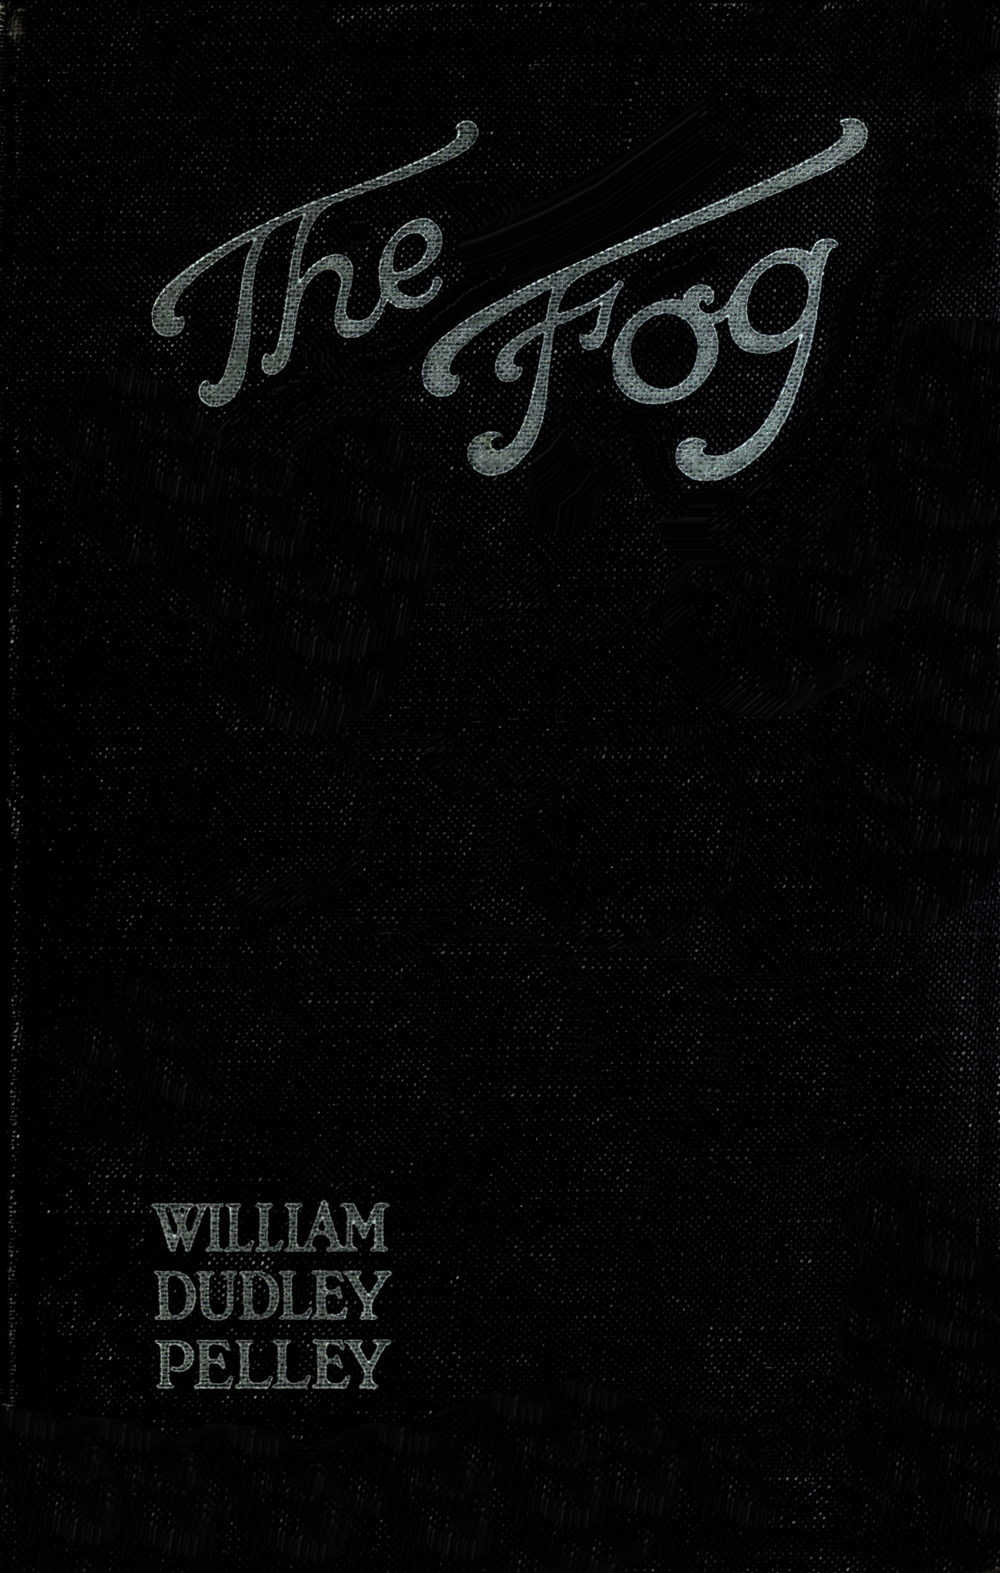 The Fog, by William Dudley Pelley—A Project Gutenberg eBook